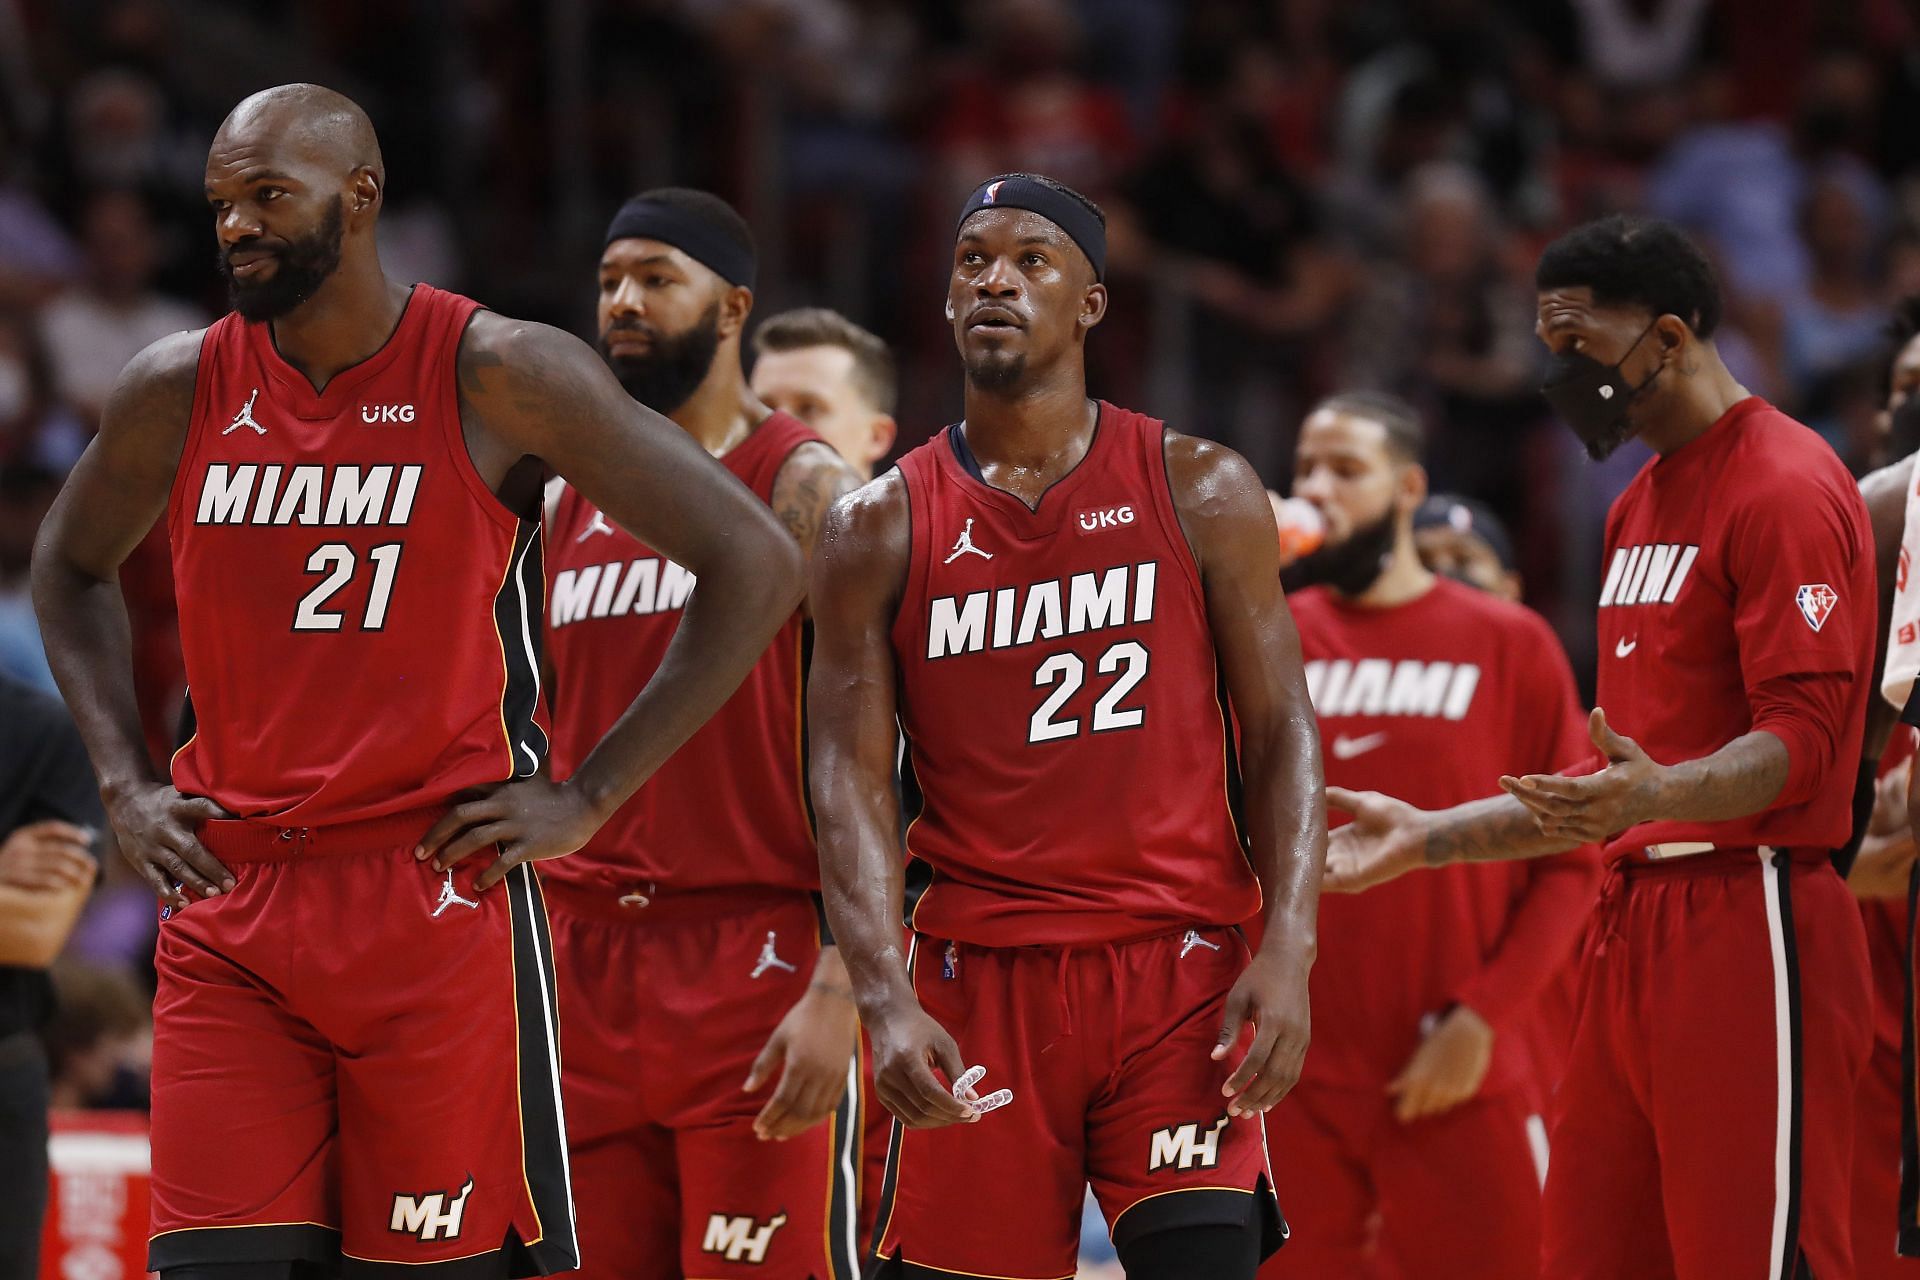 Miami Heat enter the game against the Milwaukee Bucks after a timeout